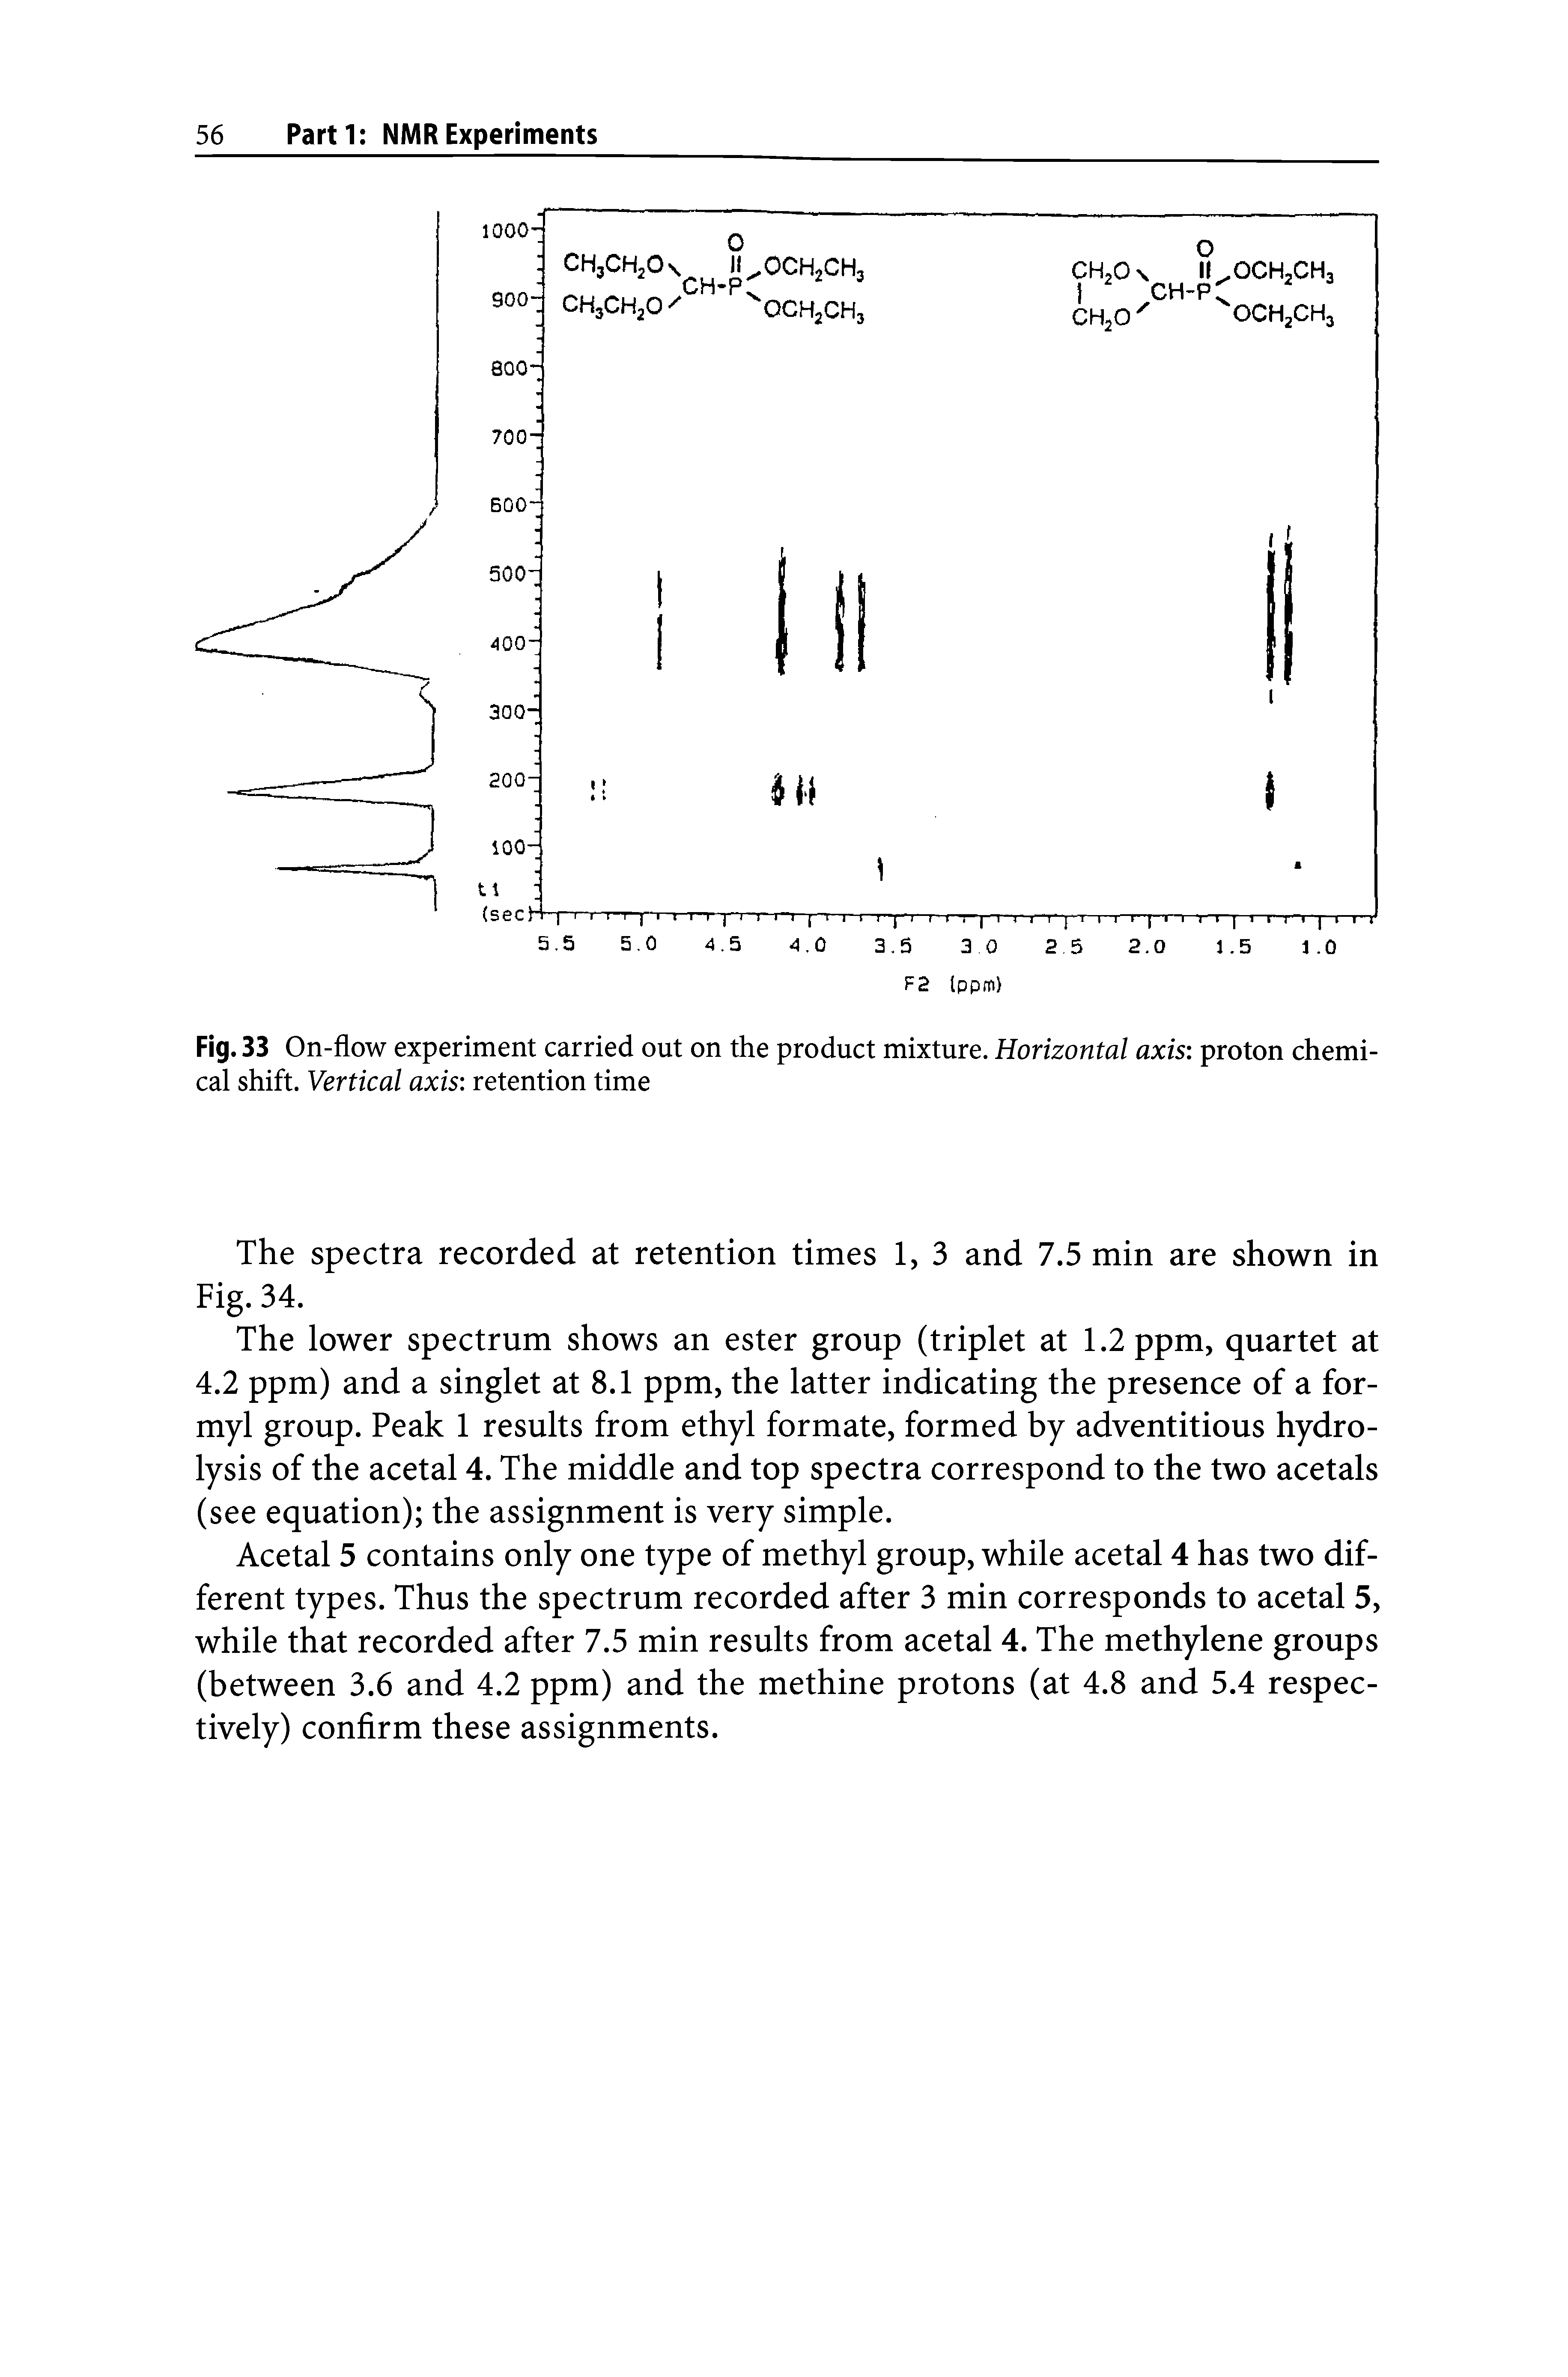 Fig. 33 On-flow experiment carried out on the product mixture. Horizontal axis proton chemical shift. Vertical axis retention time...